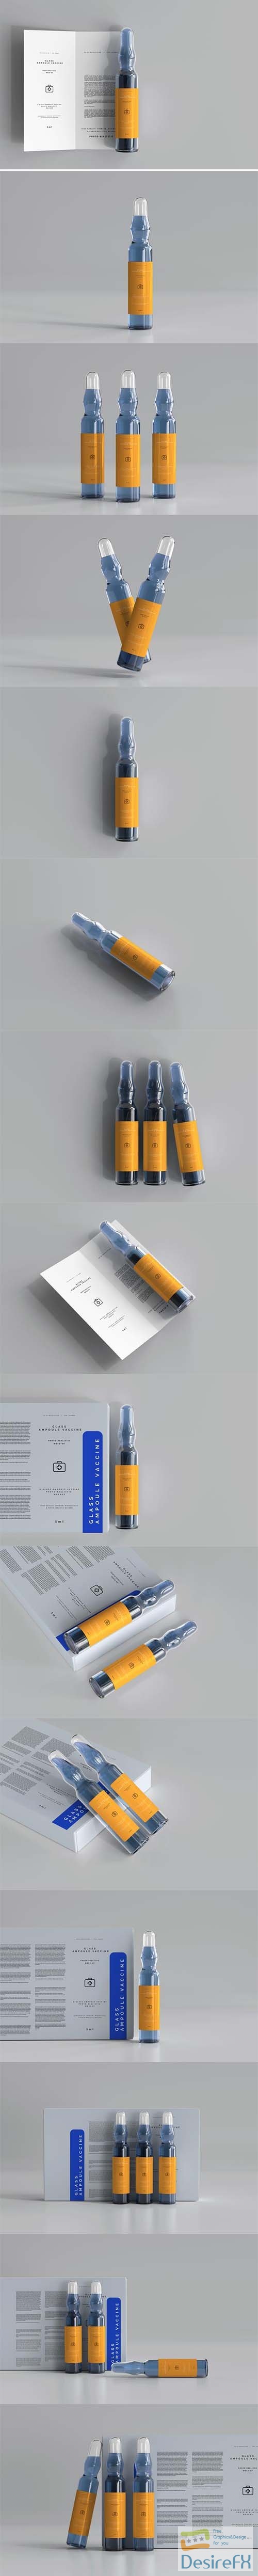 Glass ampoule vaccine with bi-fold brochure and box mockup